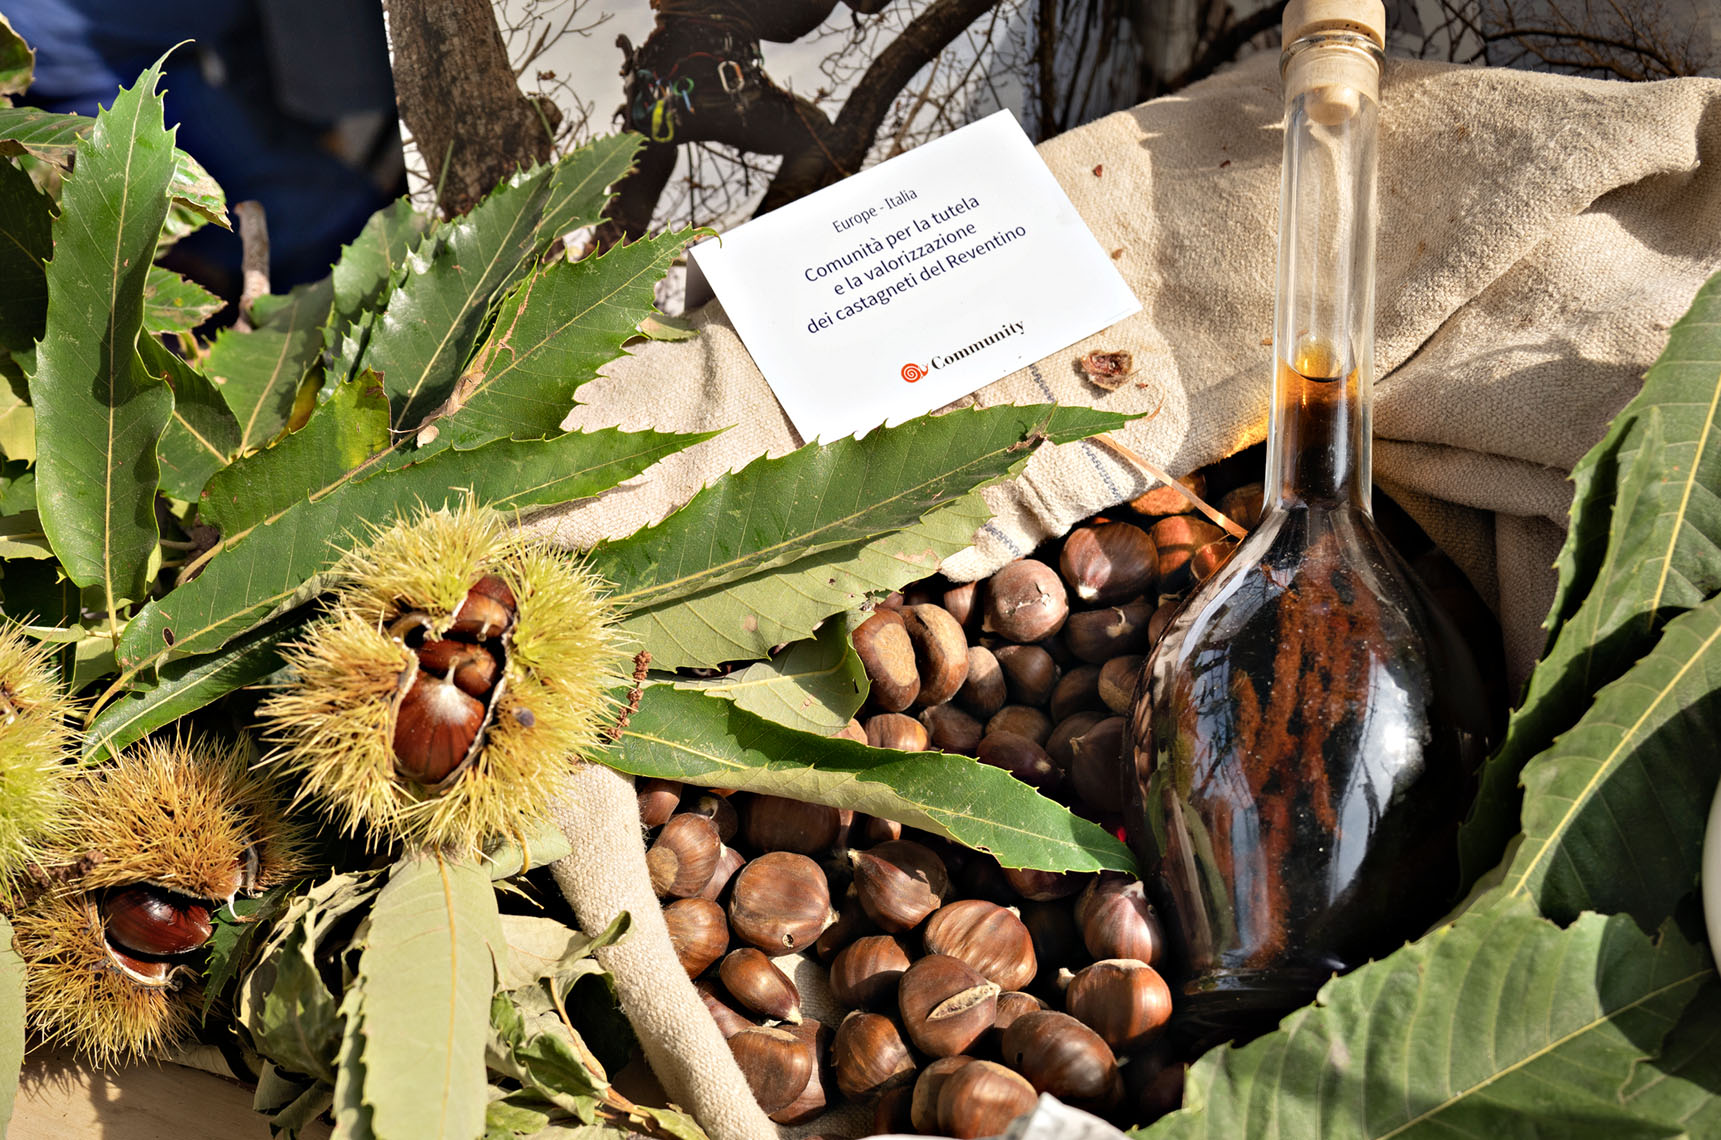 The Alto Lametino Lucente Chestnut, grown in the Reventino area of the Italian boot. This variety is highly appreciated for its taste that can be eaten fresh, dried,  or steamed.  The Slow Food network of chestnut farmers has been working to recover and spread the cultivation of chestnut groves as a common heritage, highlighting its economical, environmental and social aspects. 